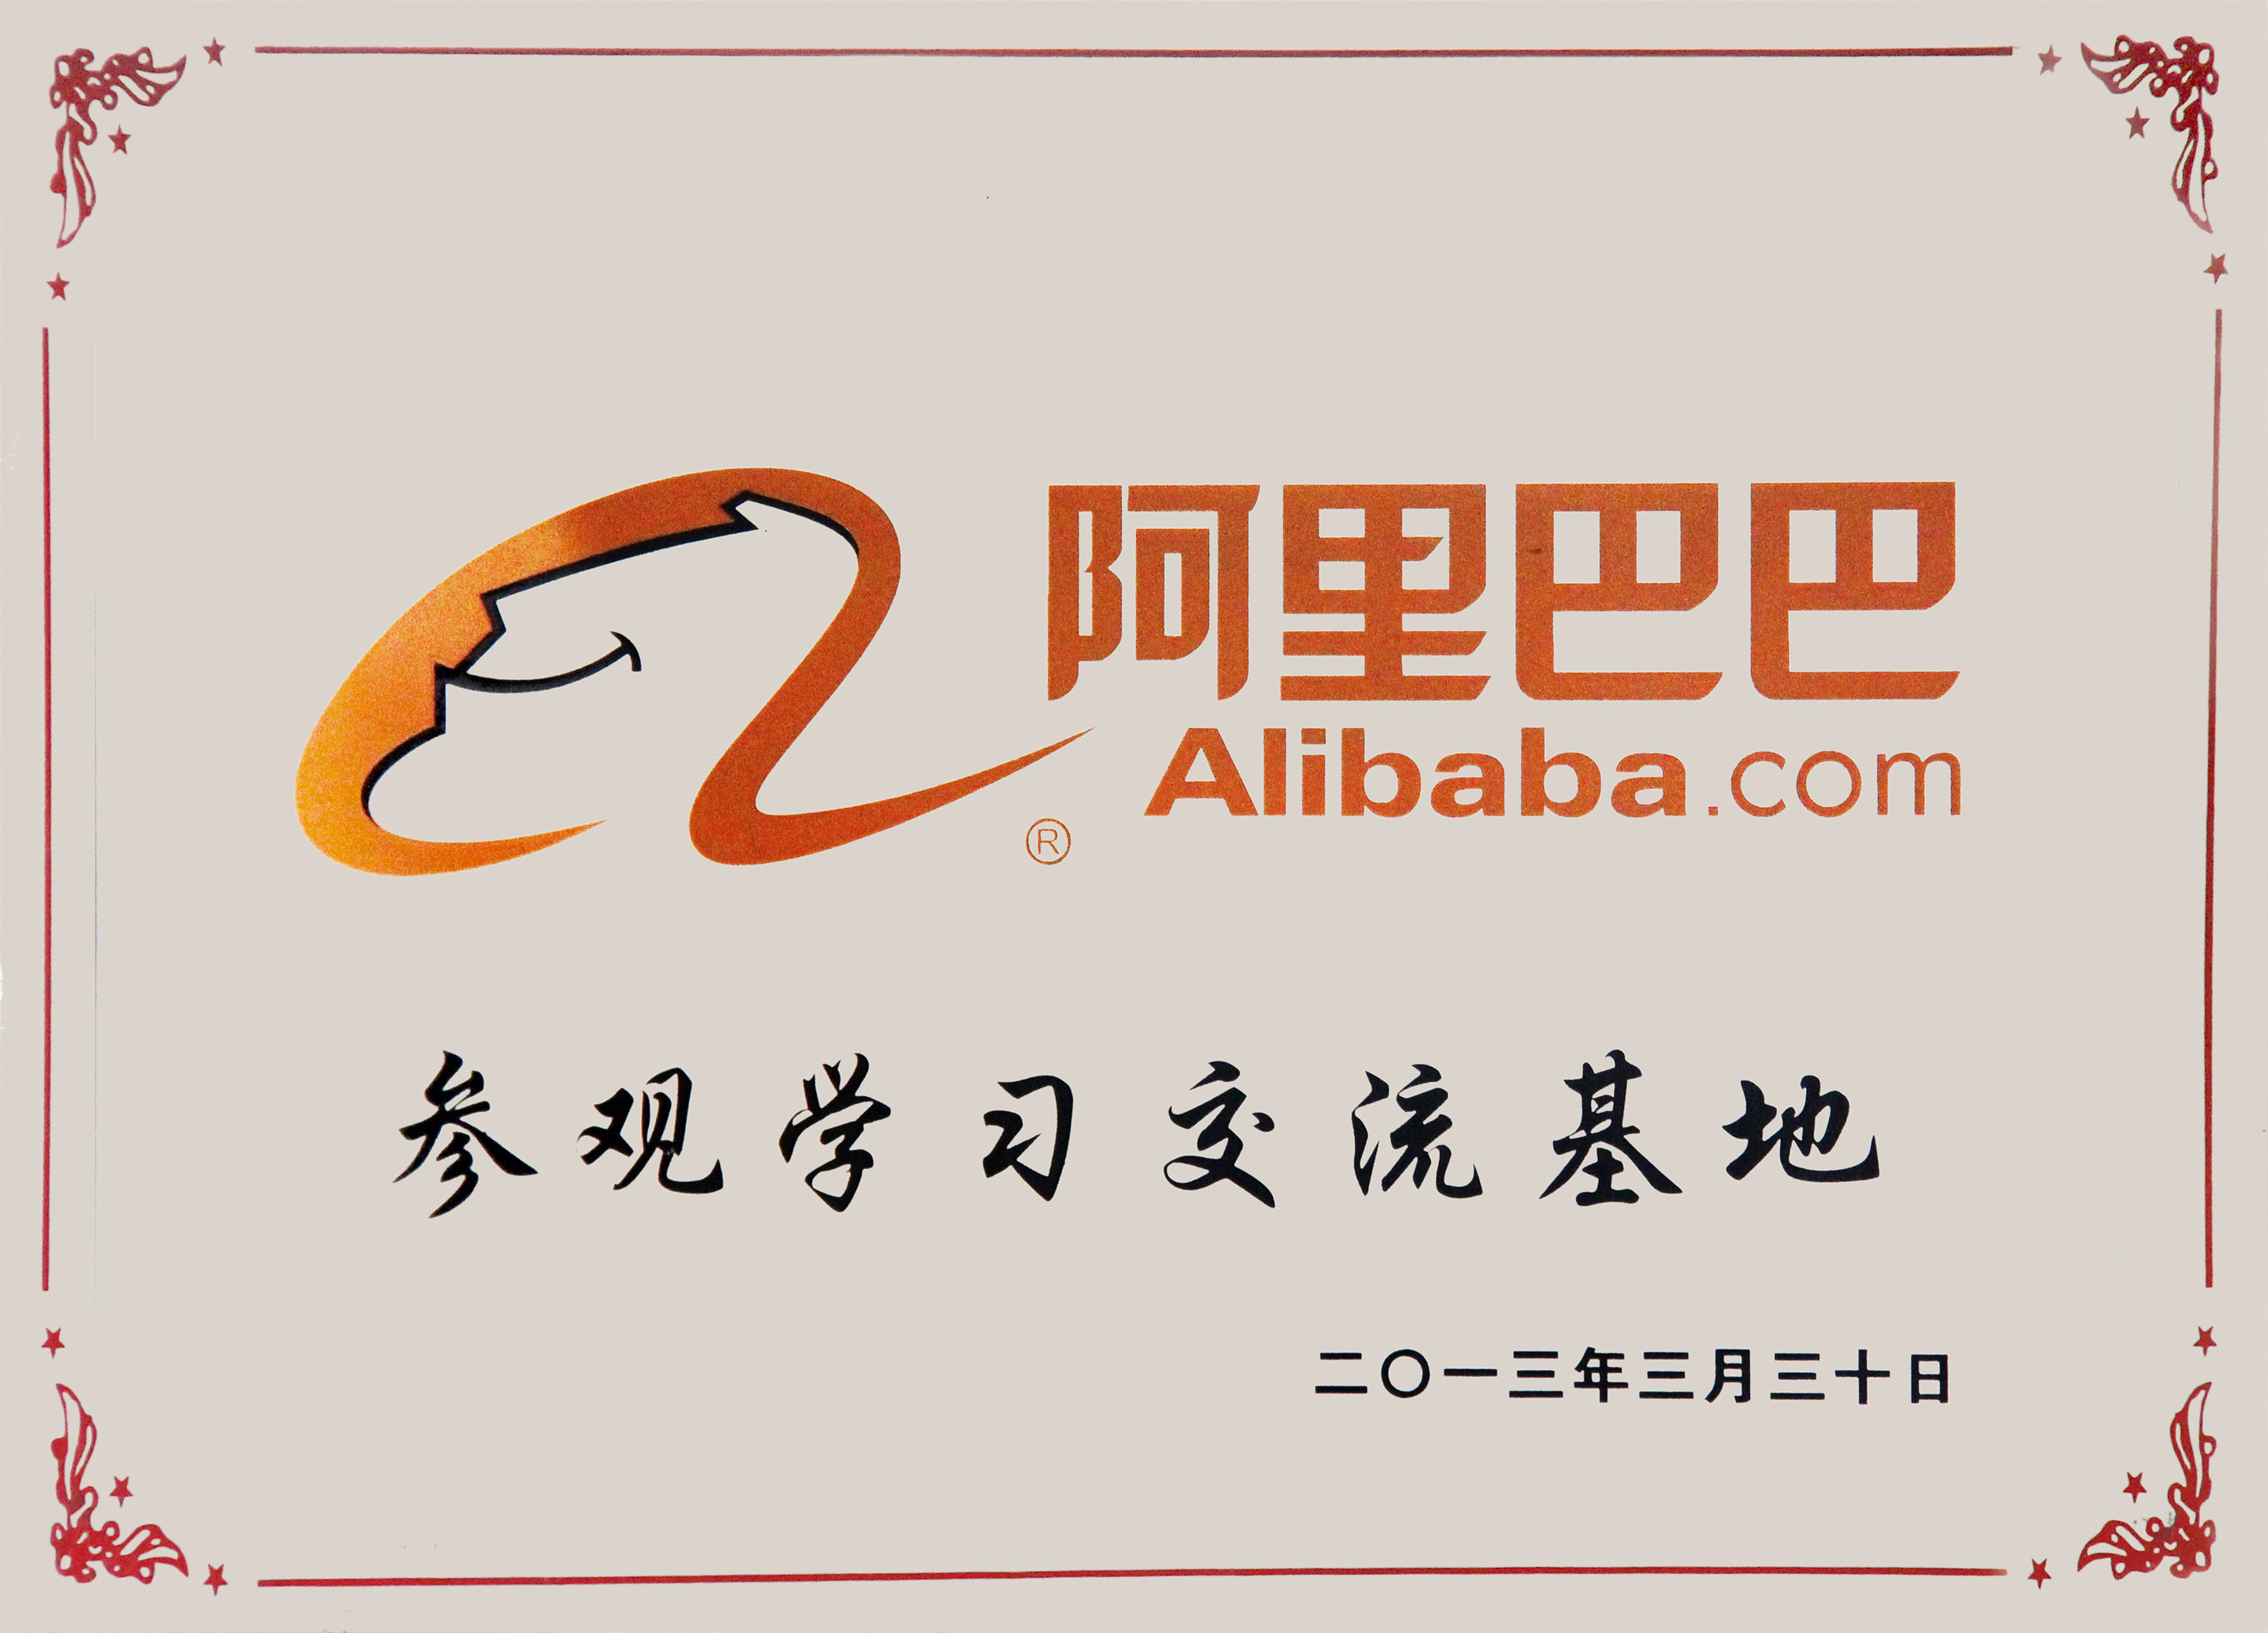 Alibaba visited the learning exchange base